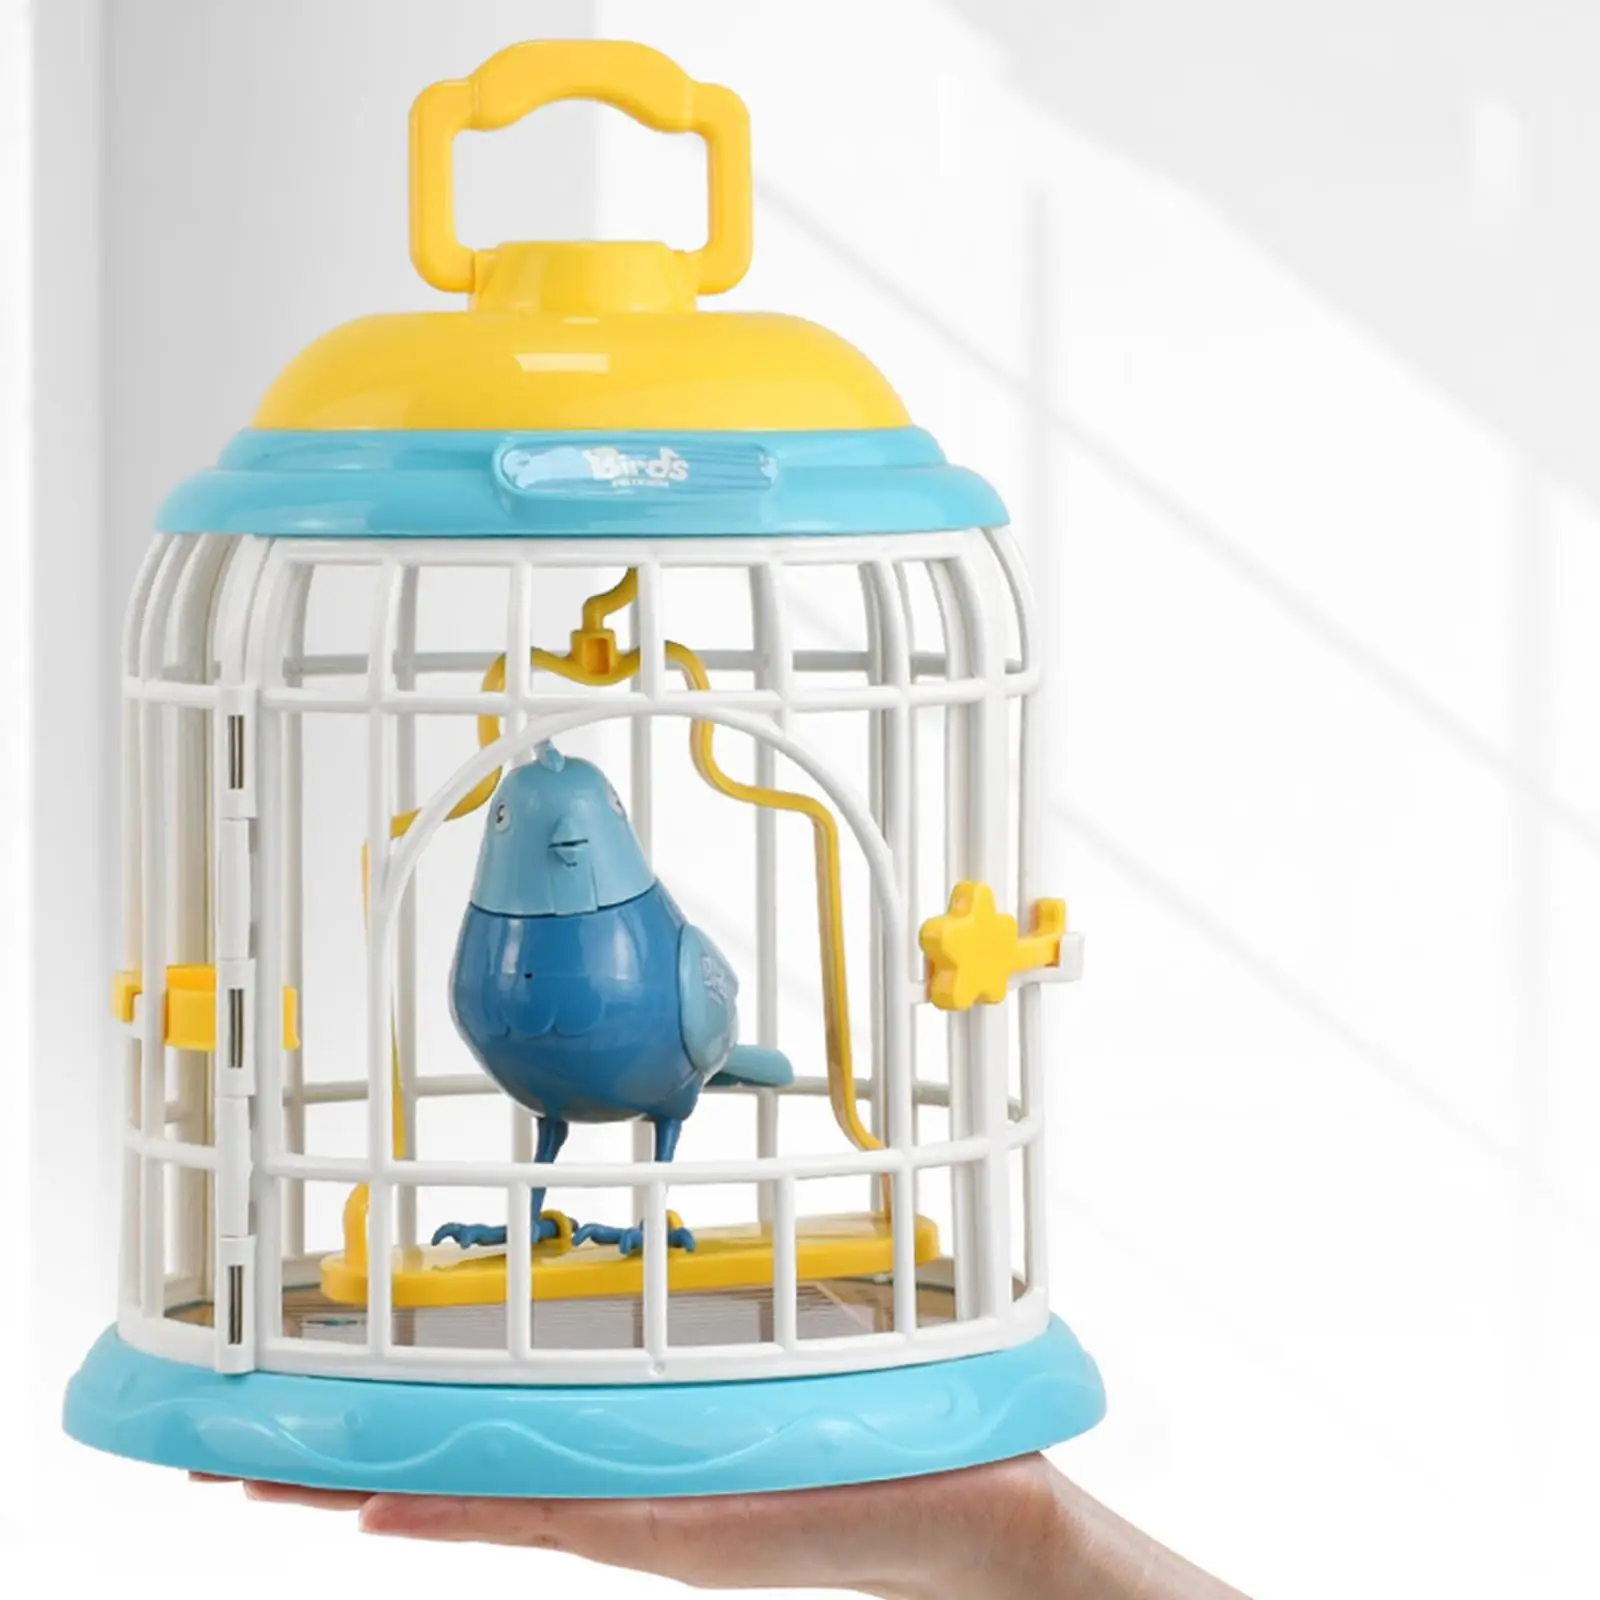  Singing Chirping Bird  Educational Toy Sparrow  Voice Control Bird Toy  Oanament Preschool Toddler Kids Child